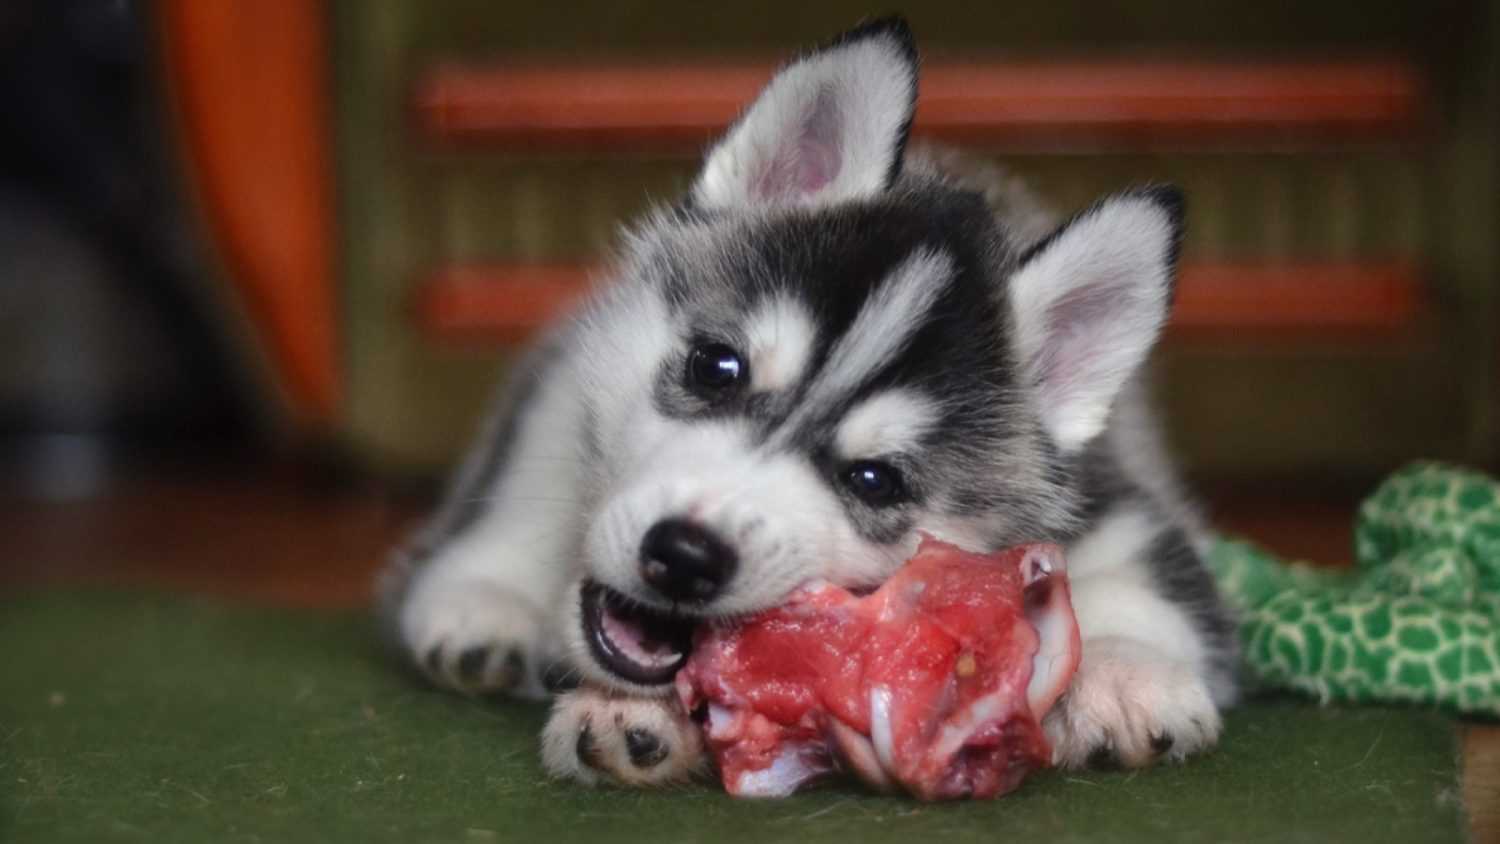 Dog eating Raw Meat